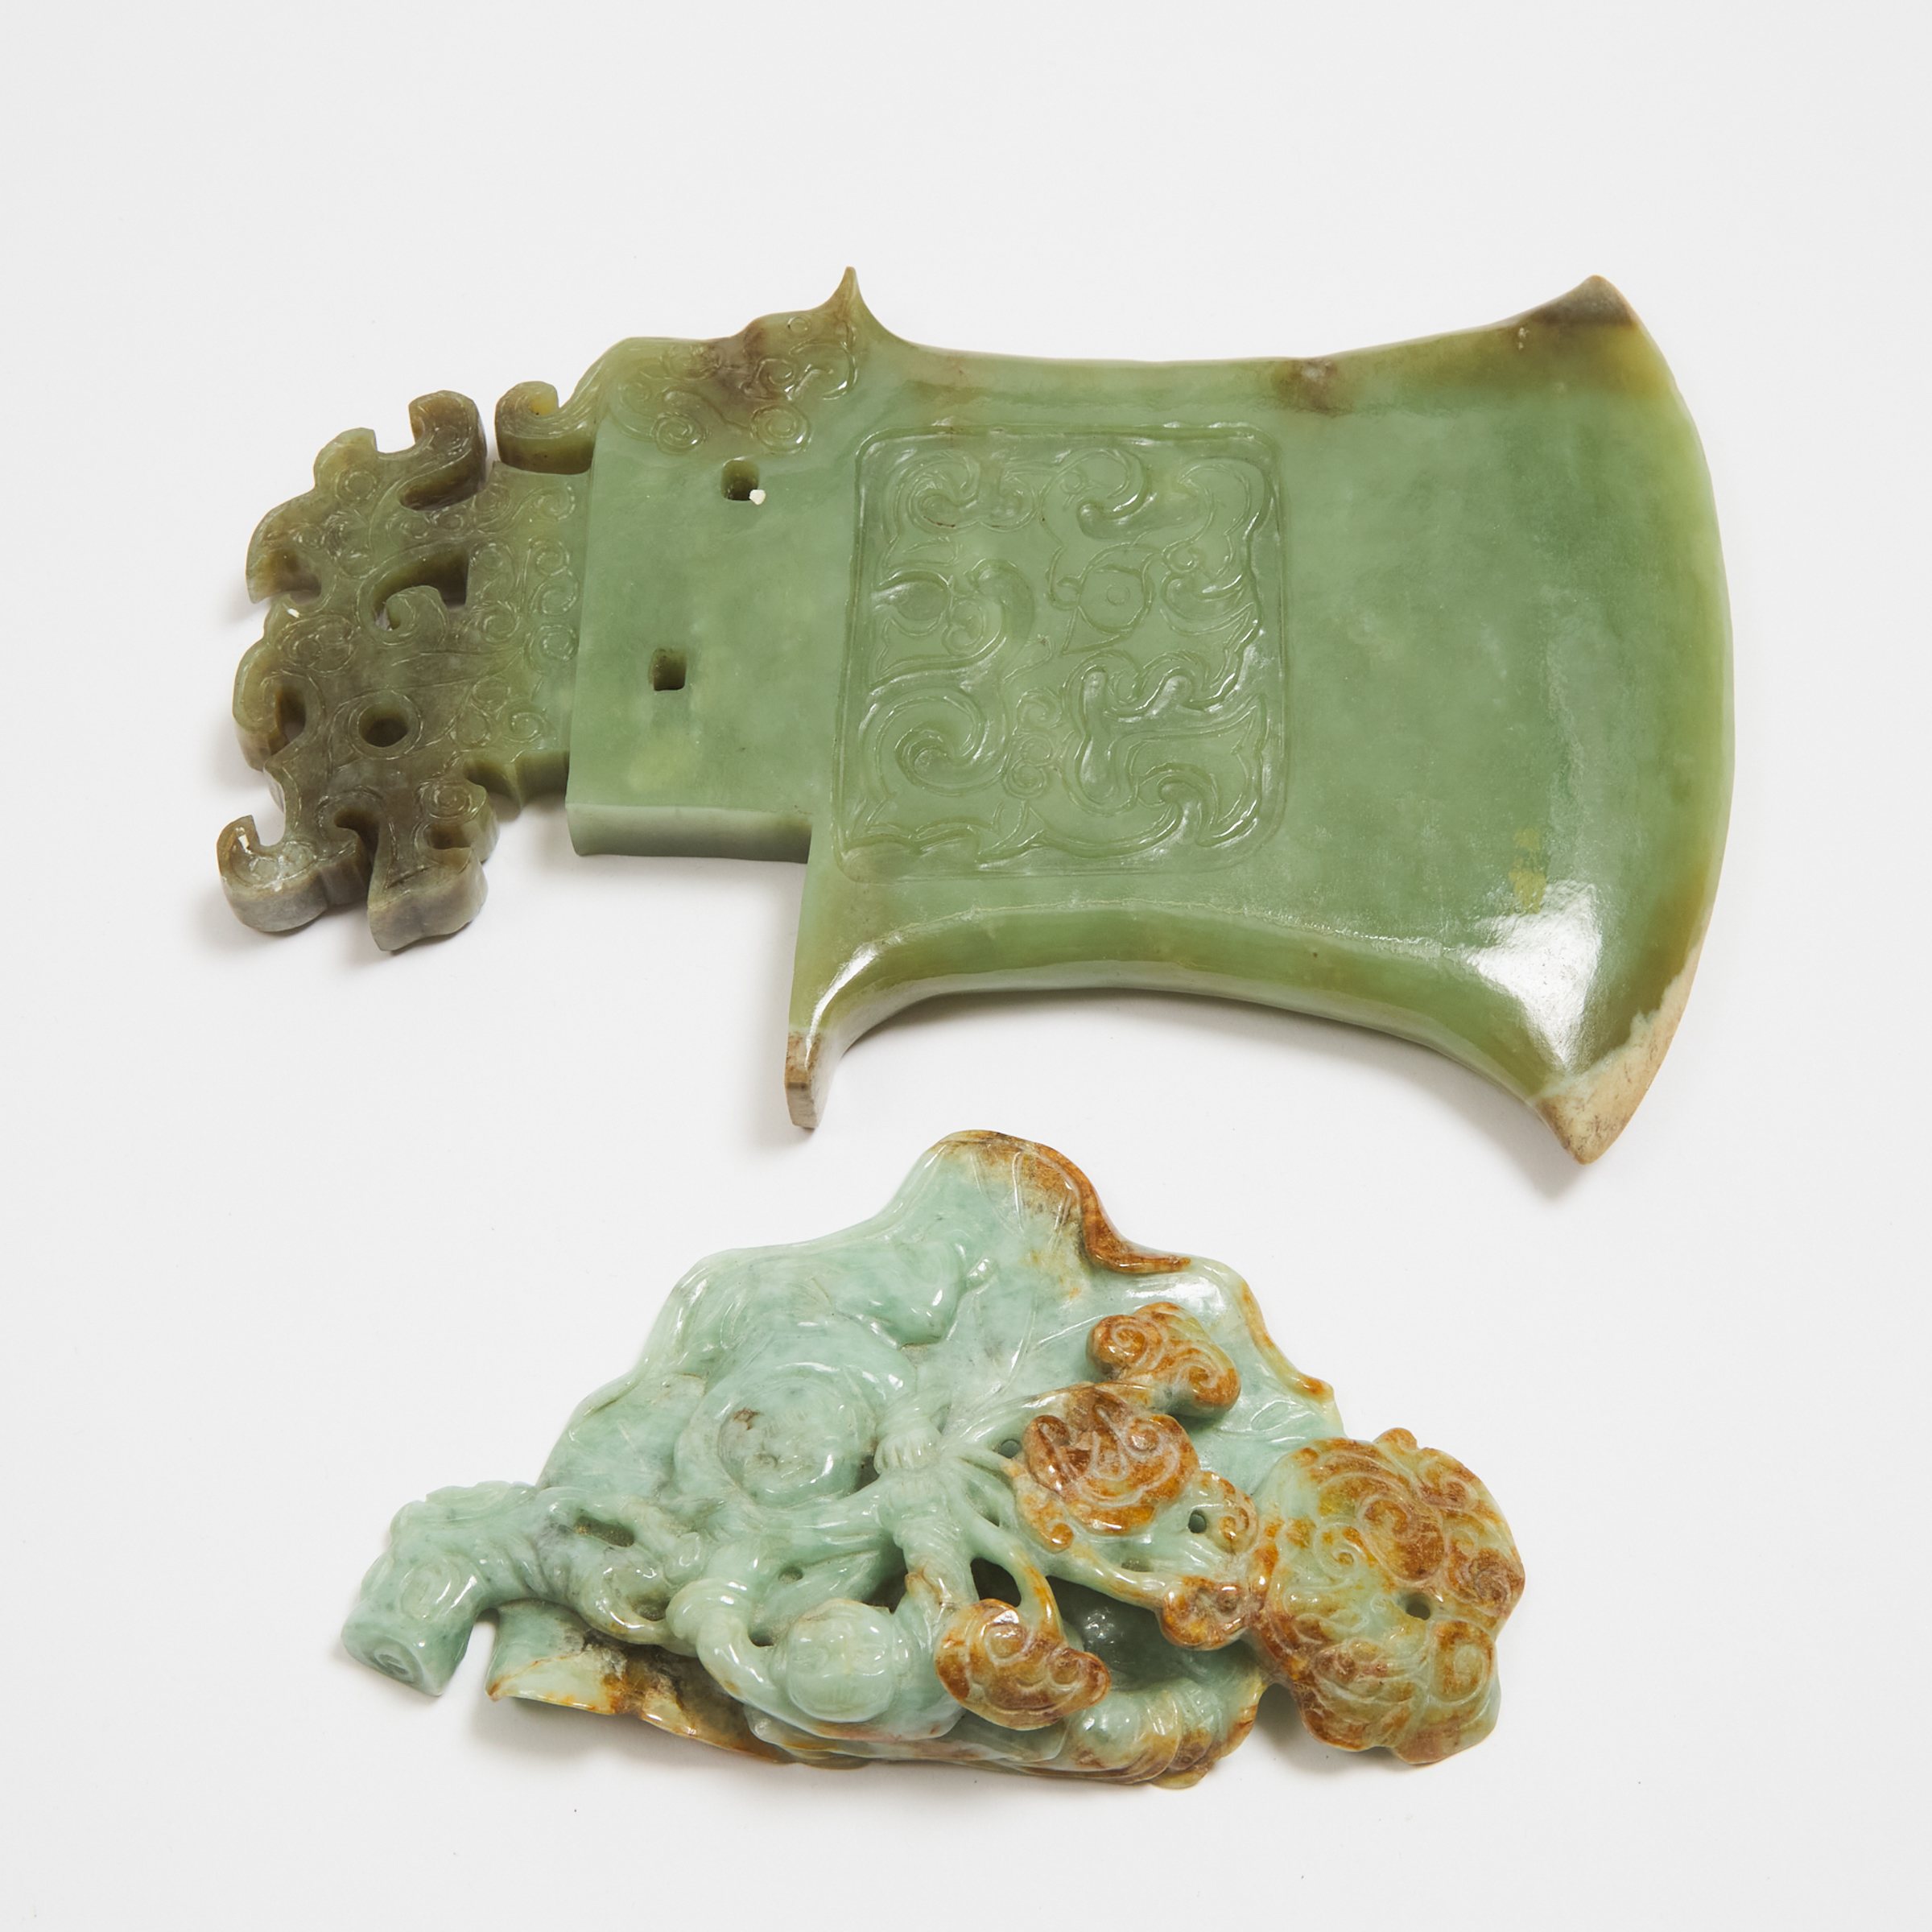 A Jadeite Archaic-Style Axe, Together With a 'Boys and Lotus' Group, 20th Century